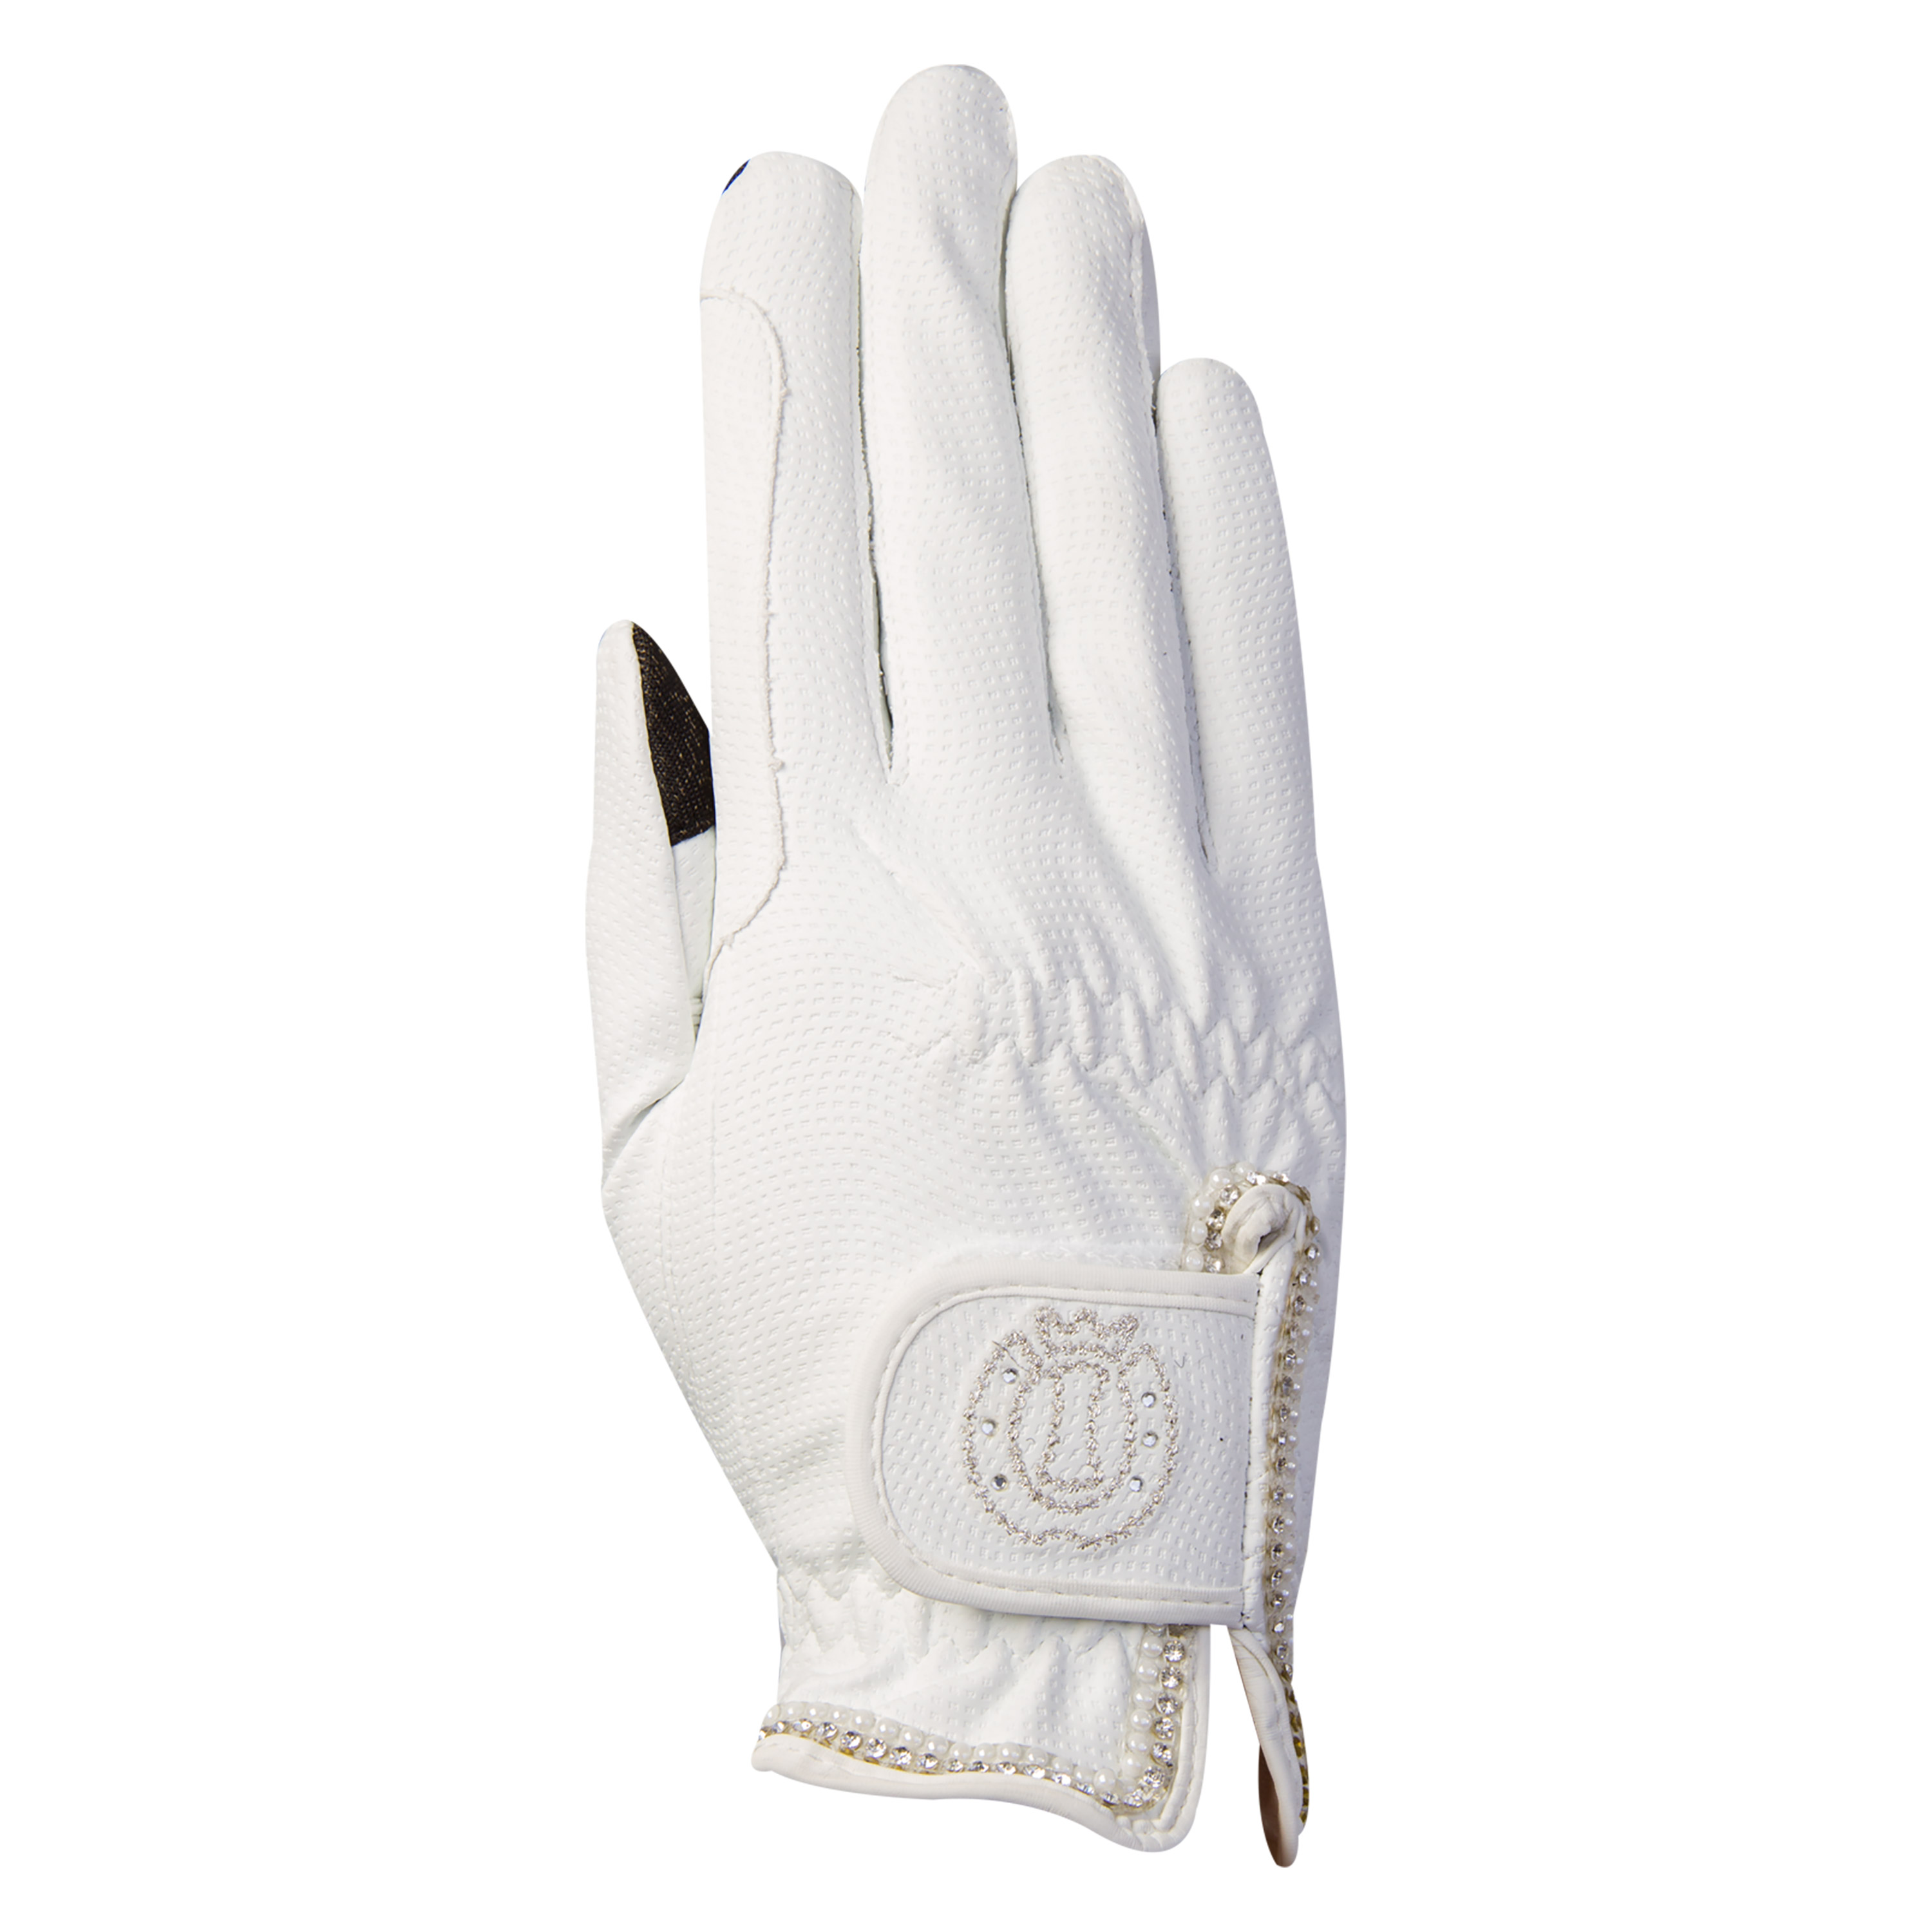 Imperial Riding | Handschuhe Loraine White | M